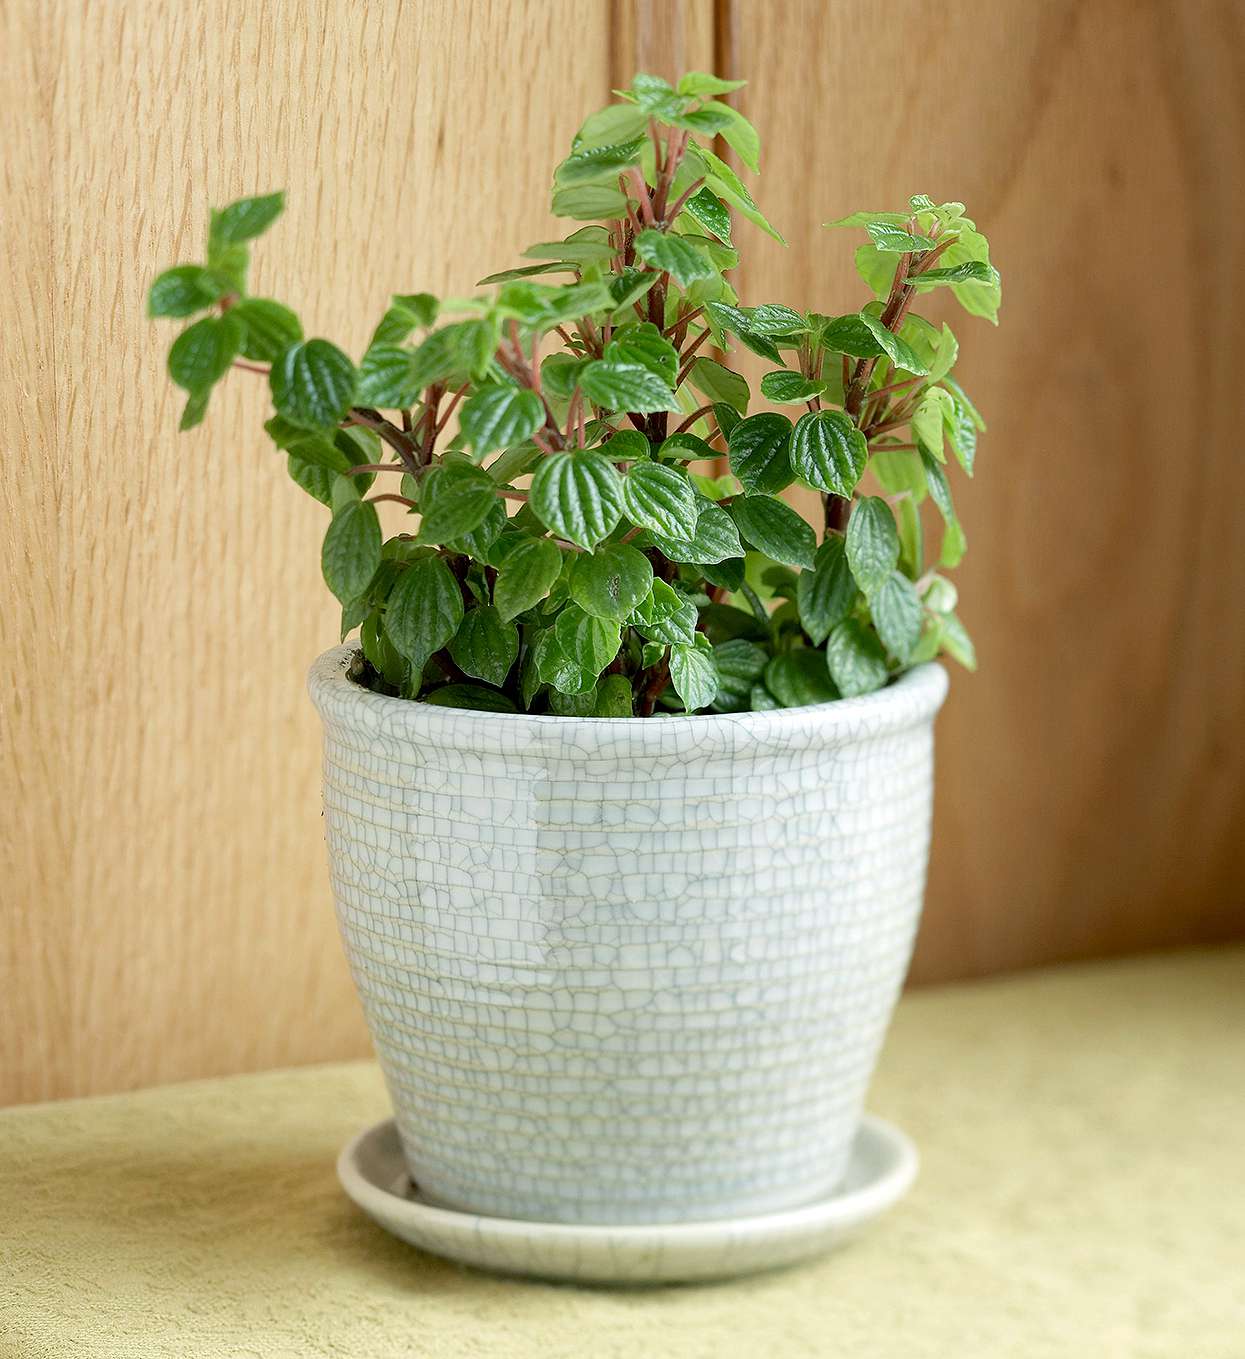 japanese peperomia japonica with red stems in ceramic planter